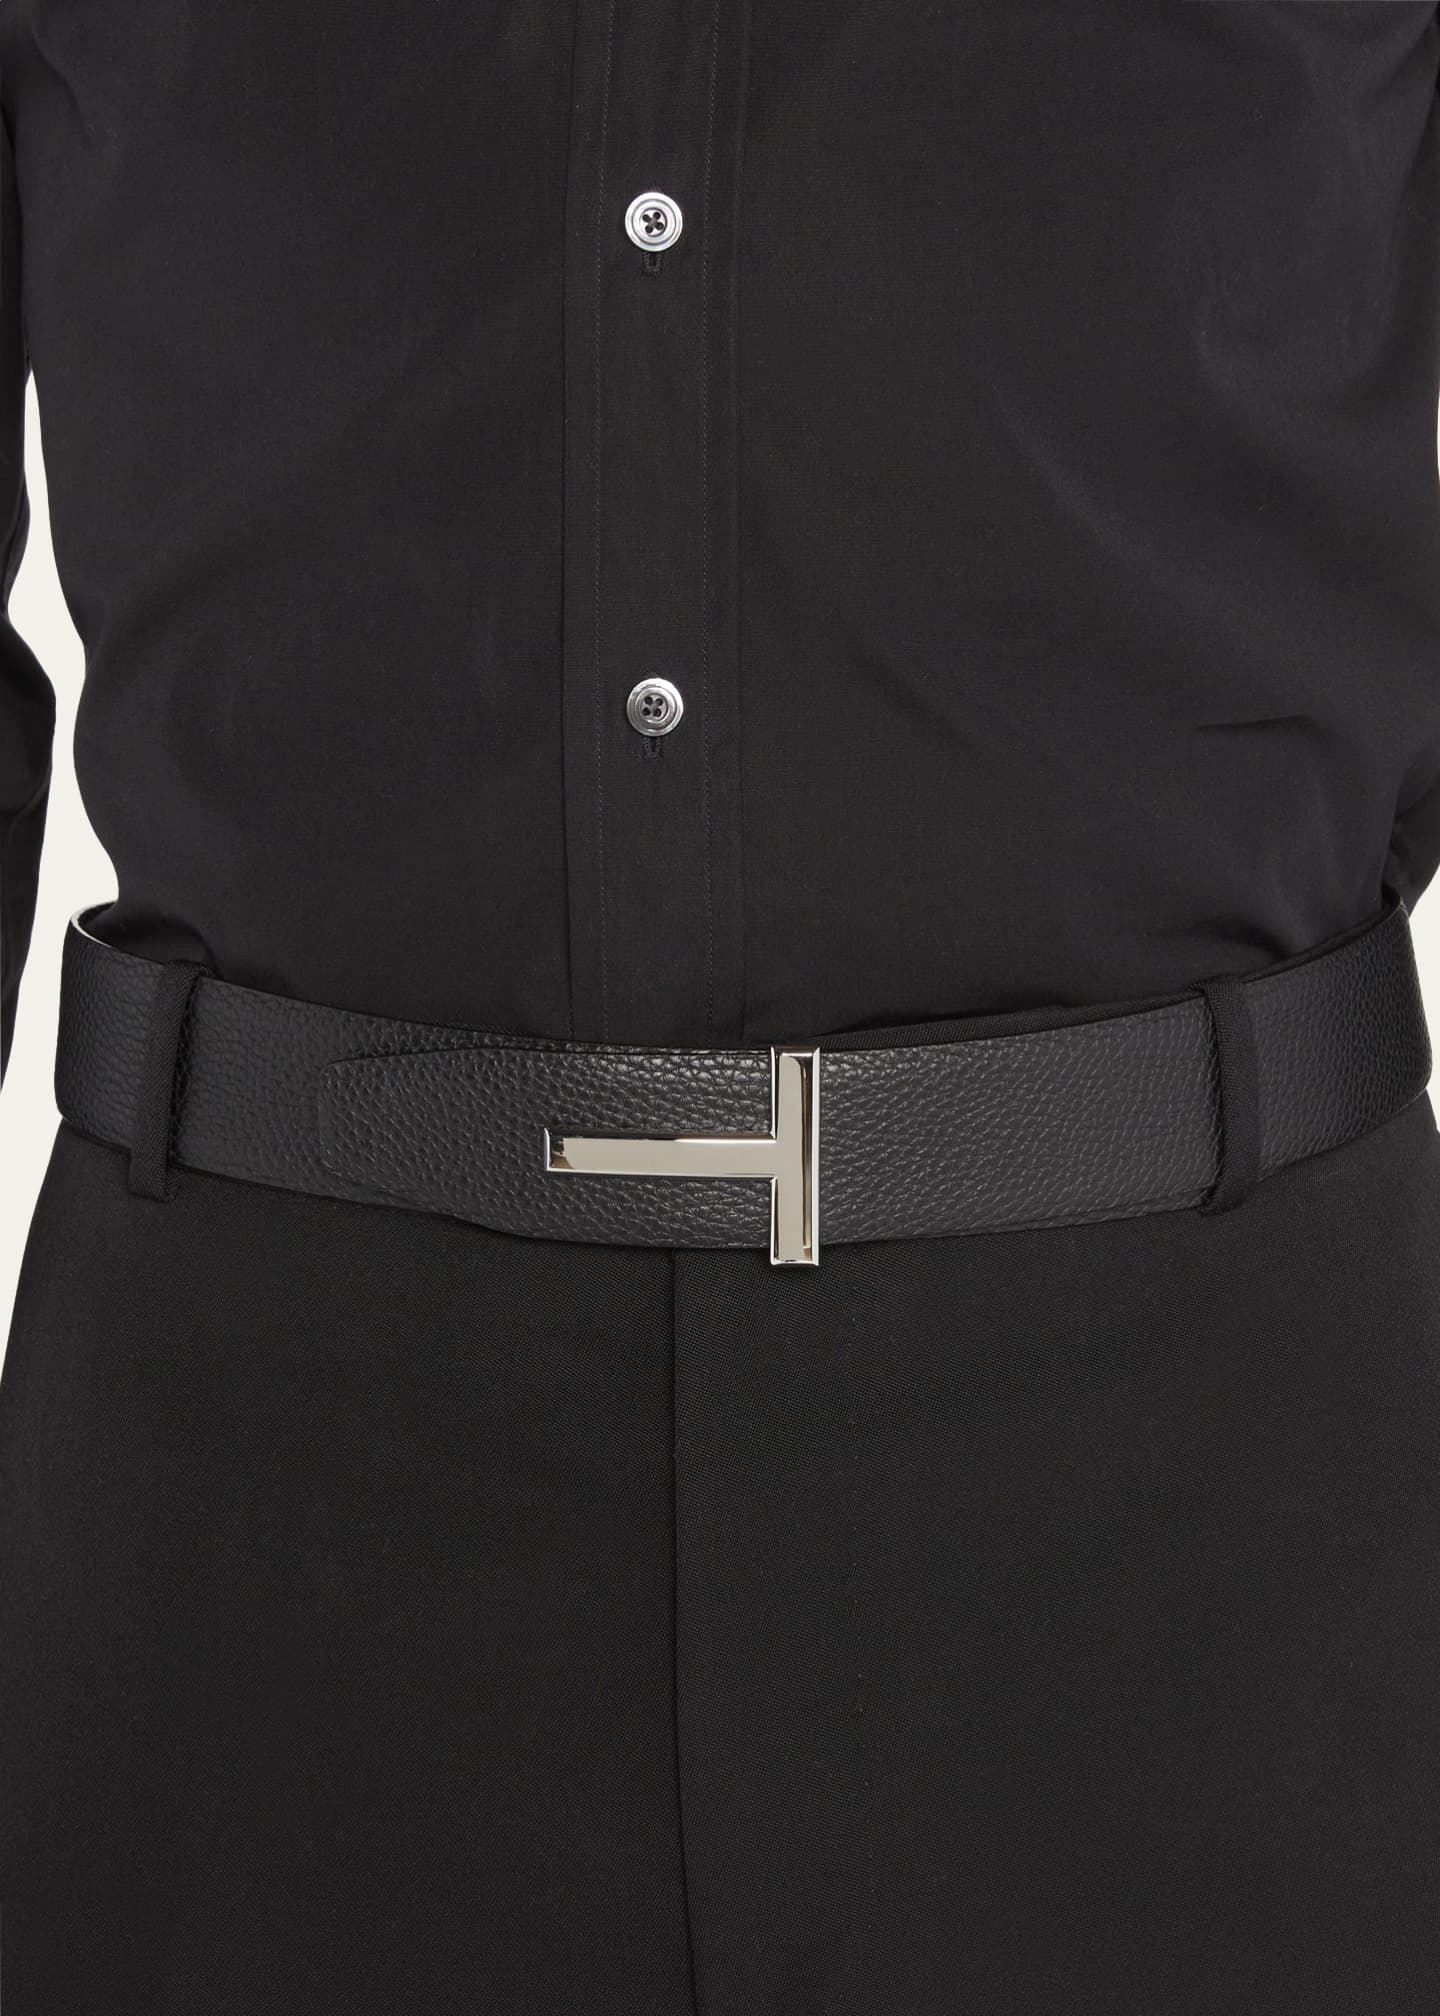 T ICON REVERSIBLE LEATHER BELT